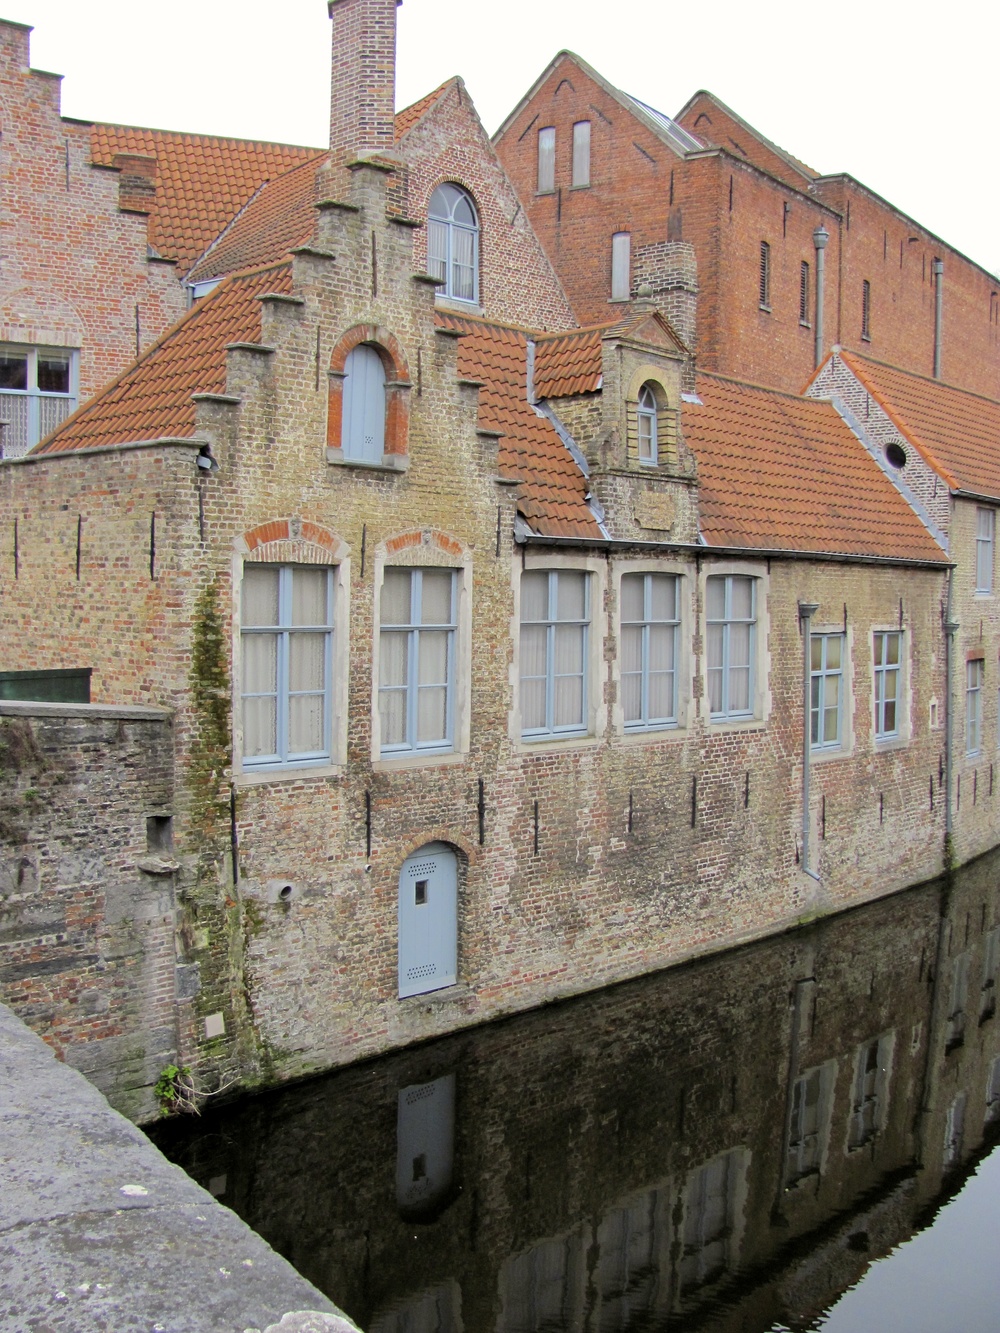  Building facade on canal, Bruges, Belgium, VHS 2010 